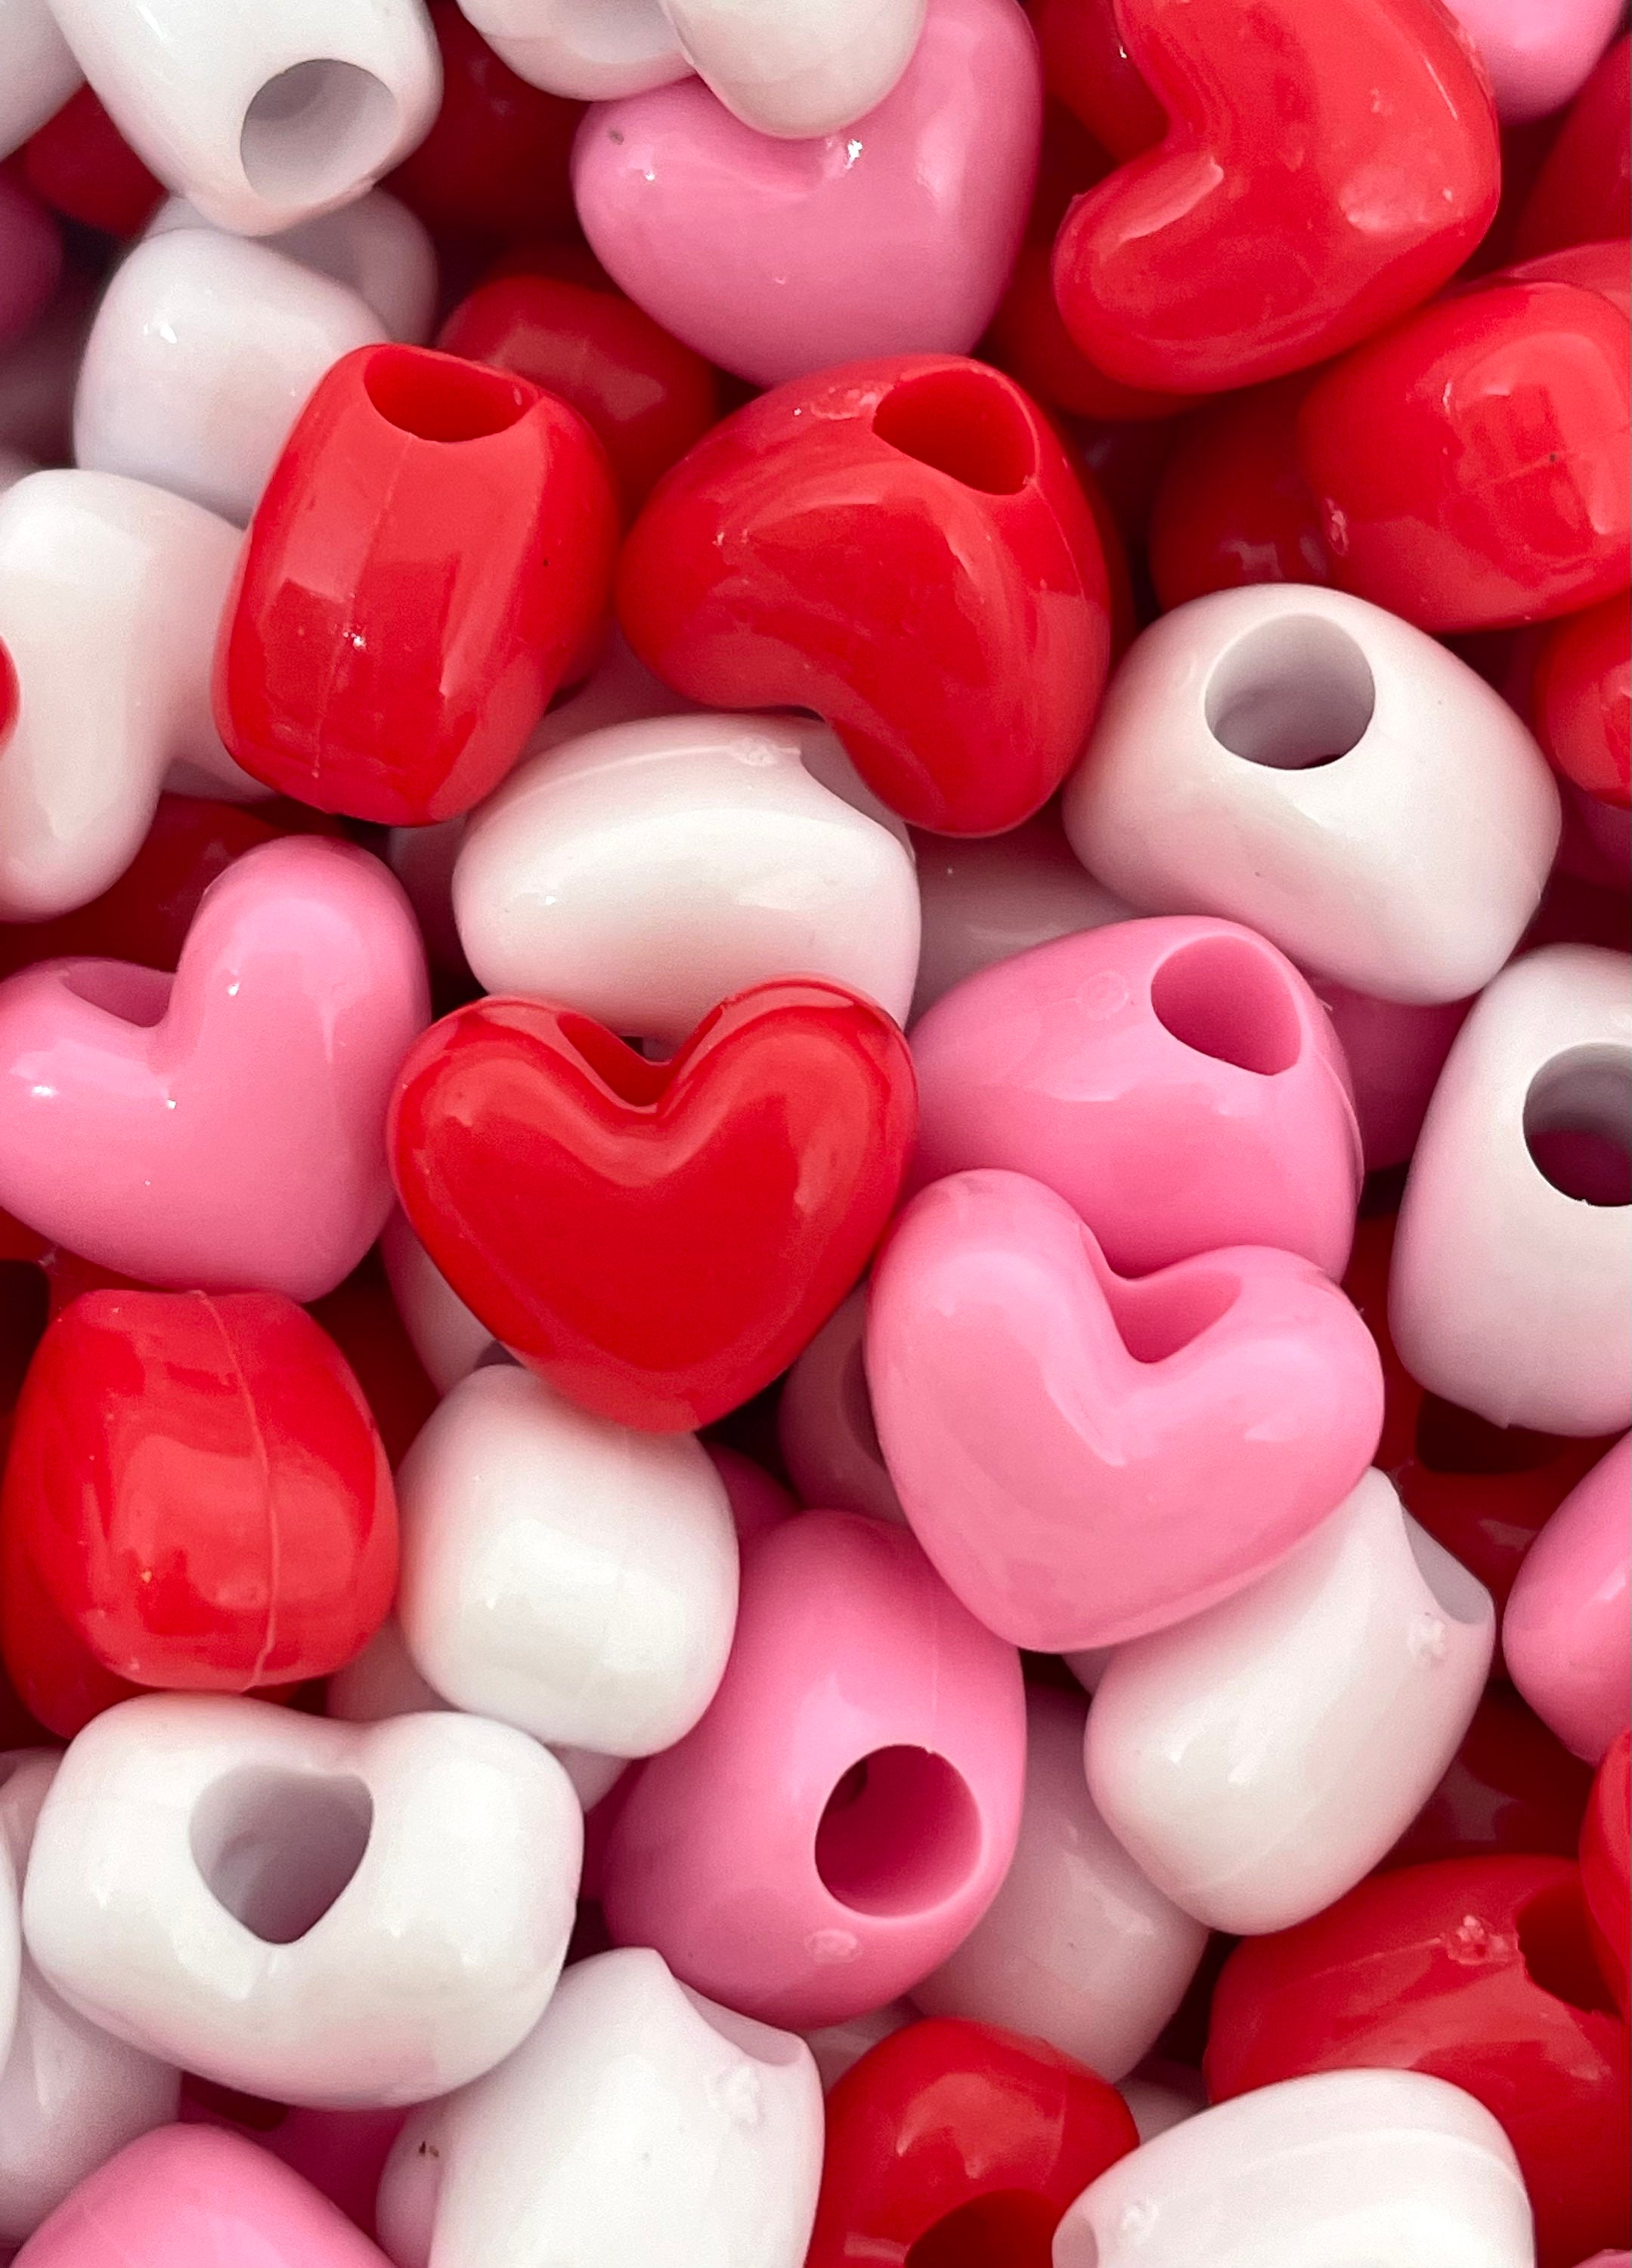 Valentines Day Beads Set for Jewelry Making, Heart Bead Variety for  Necklace, Valentine's Day Beads, Valentine's Day Charm 